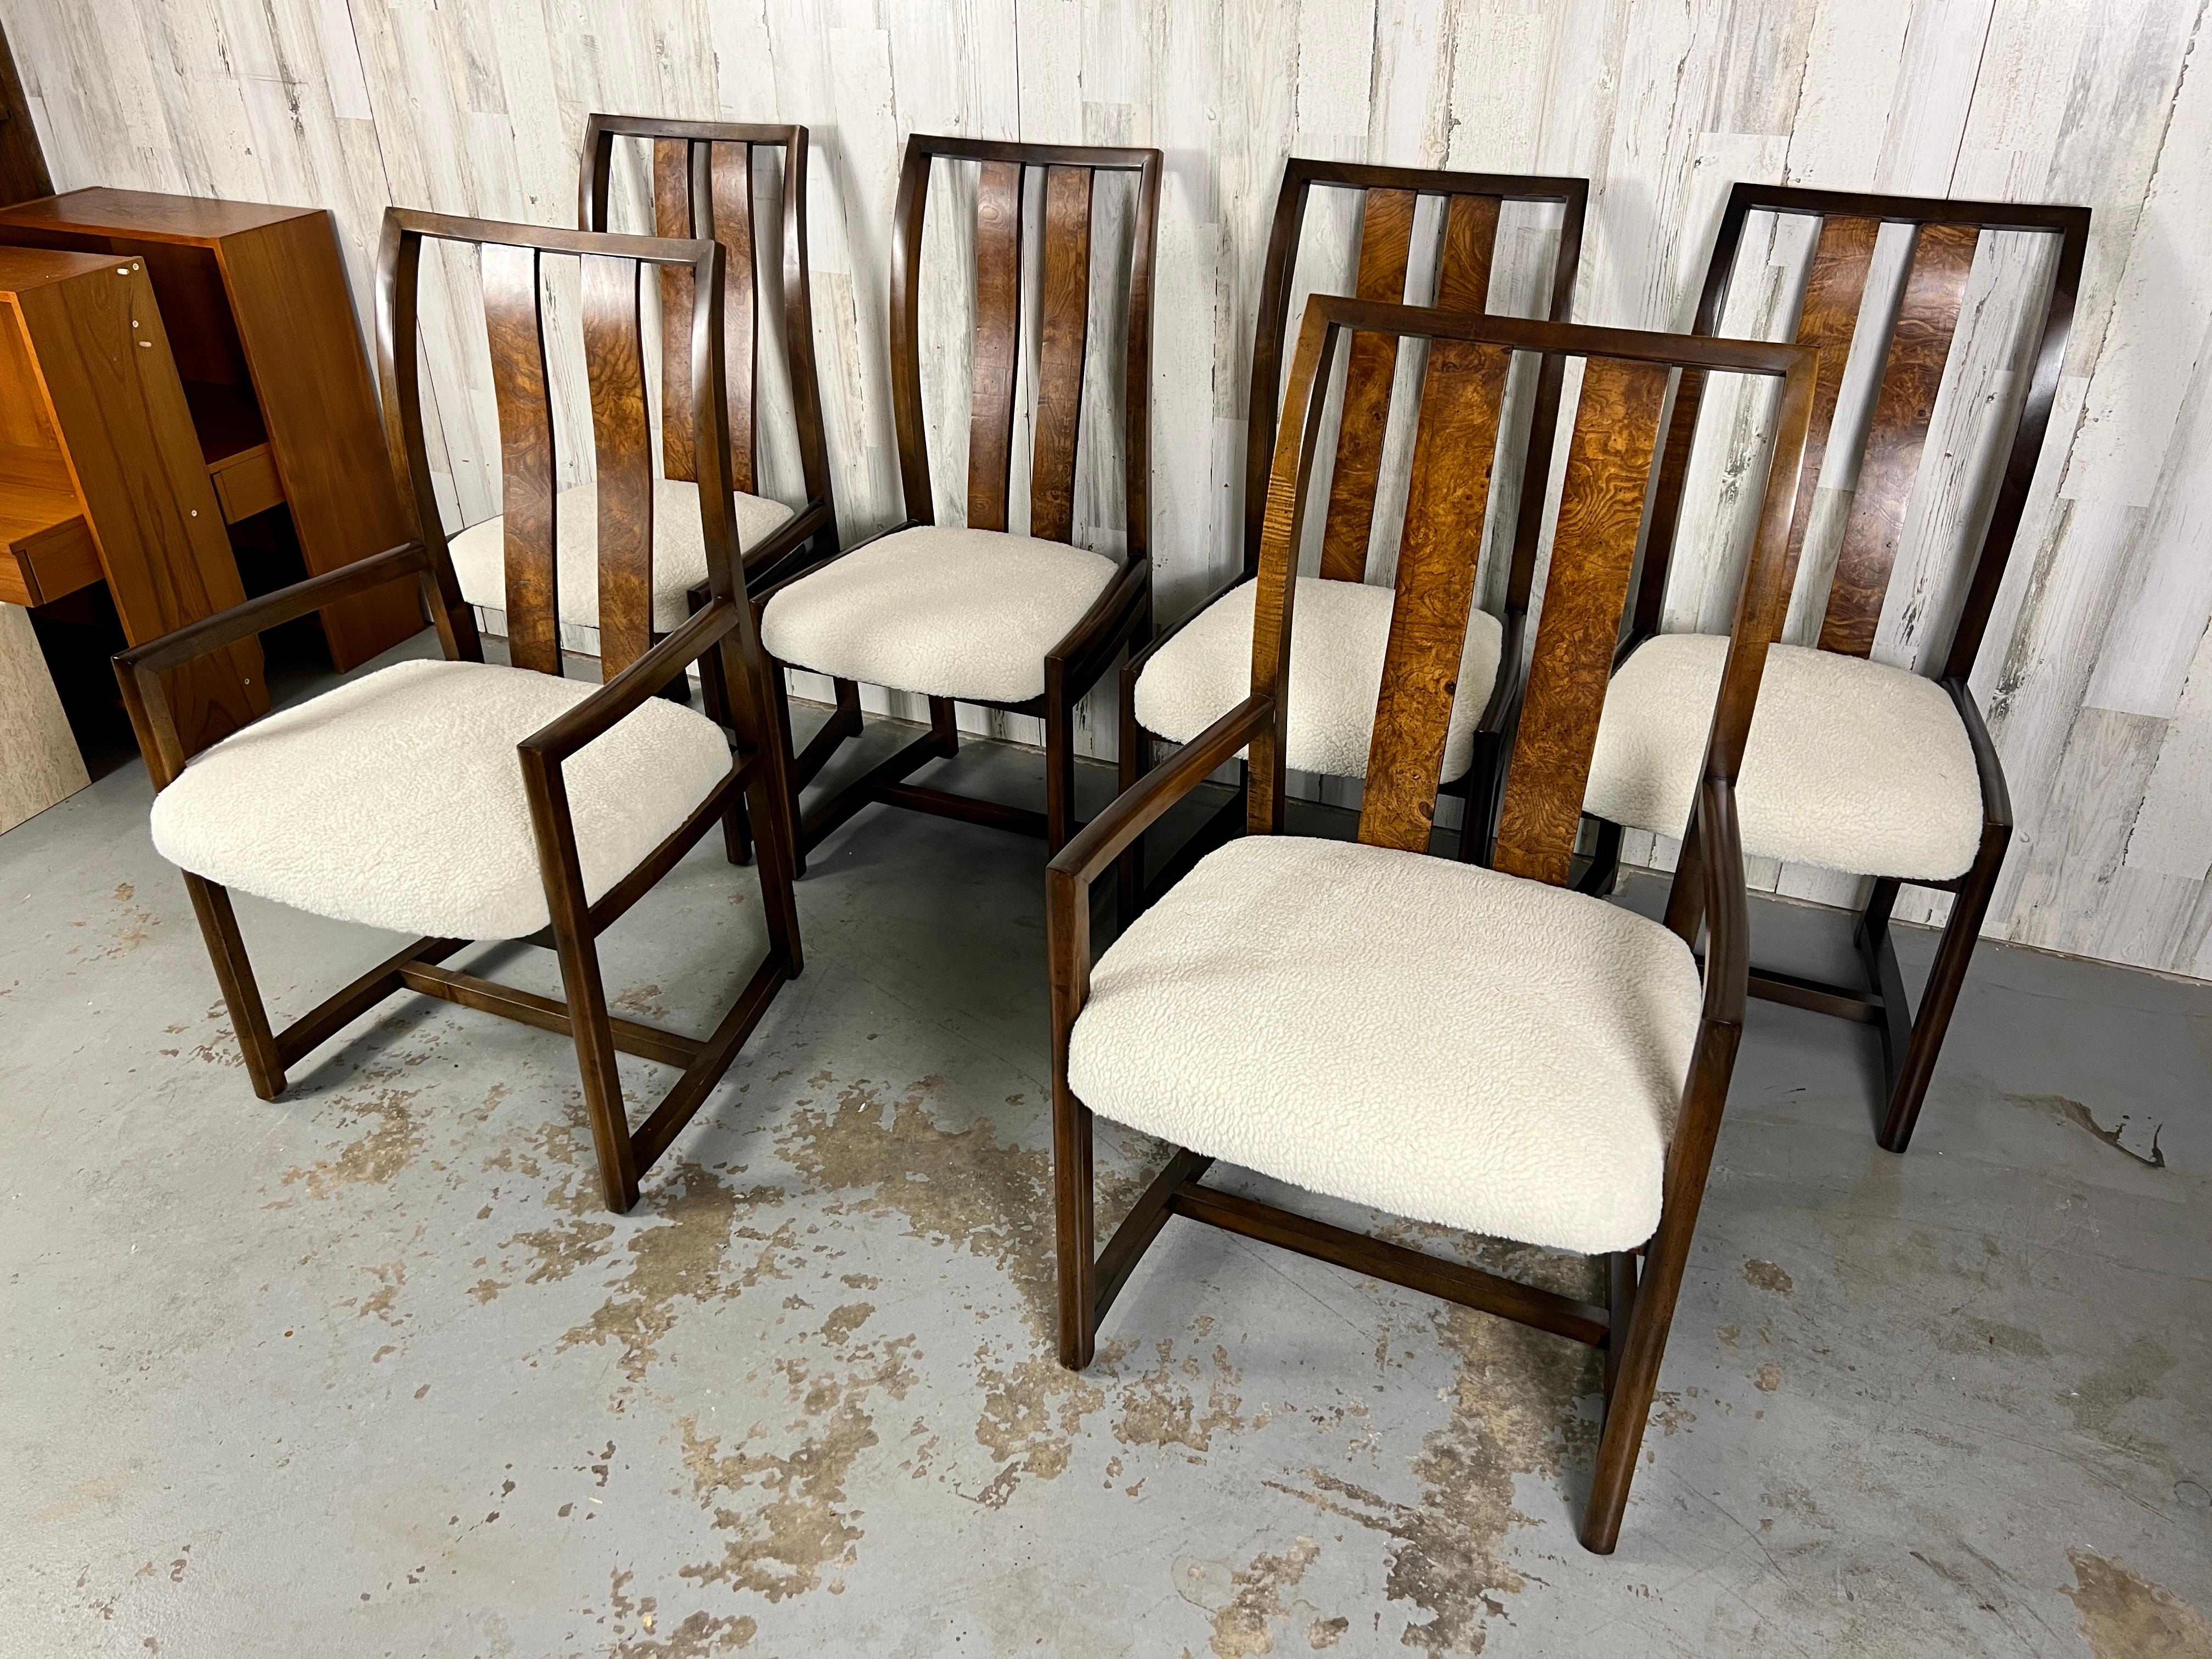 1980s Modernist Dining Chairs with Burl Wood Back Splat In Good Condition For Sale In Denton, TX